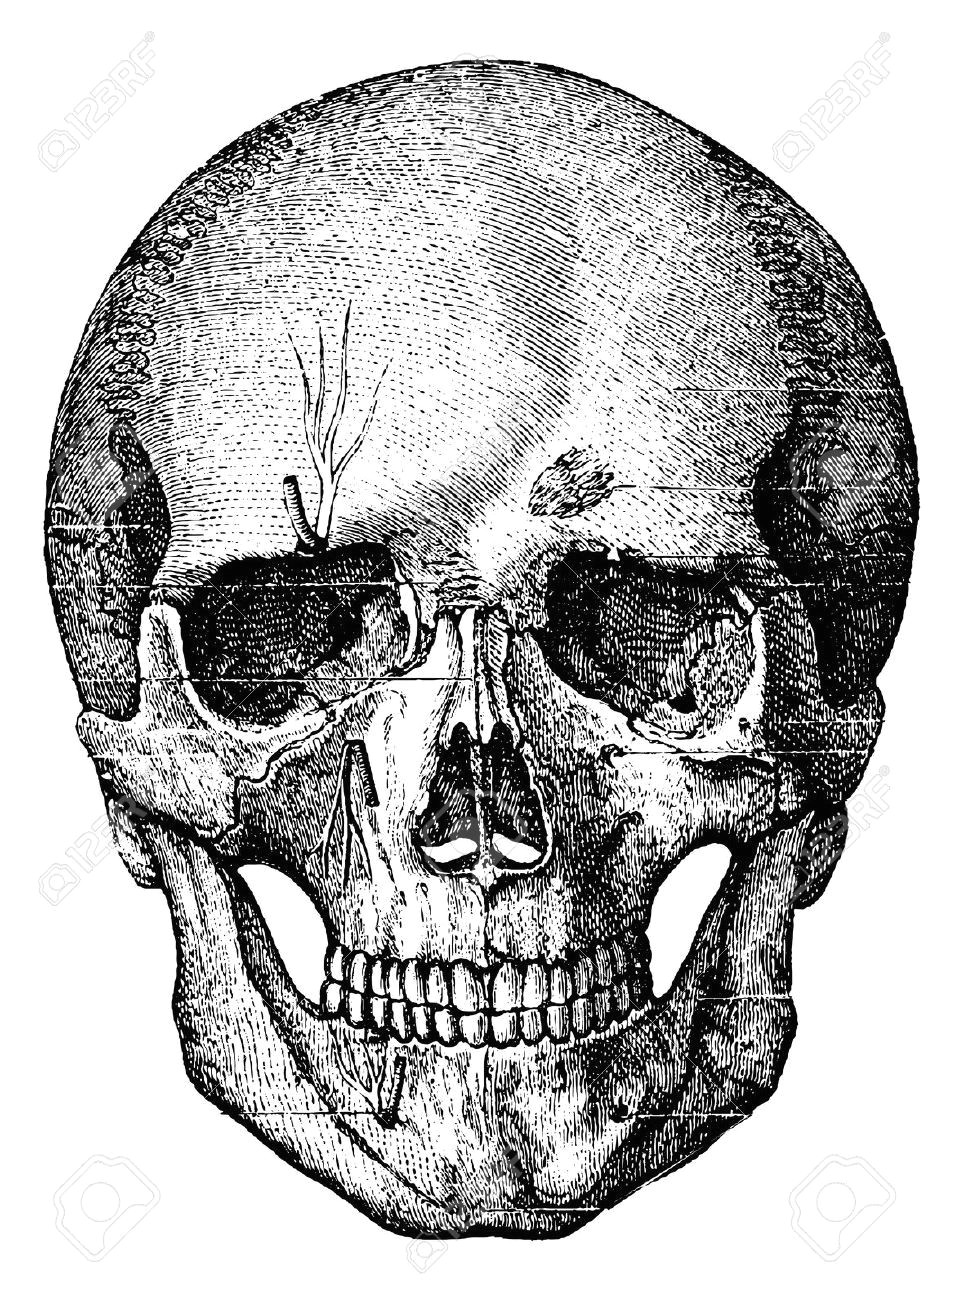 bony skeleton of the face and the anterior part of the skull